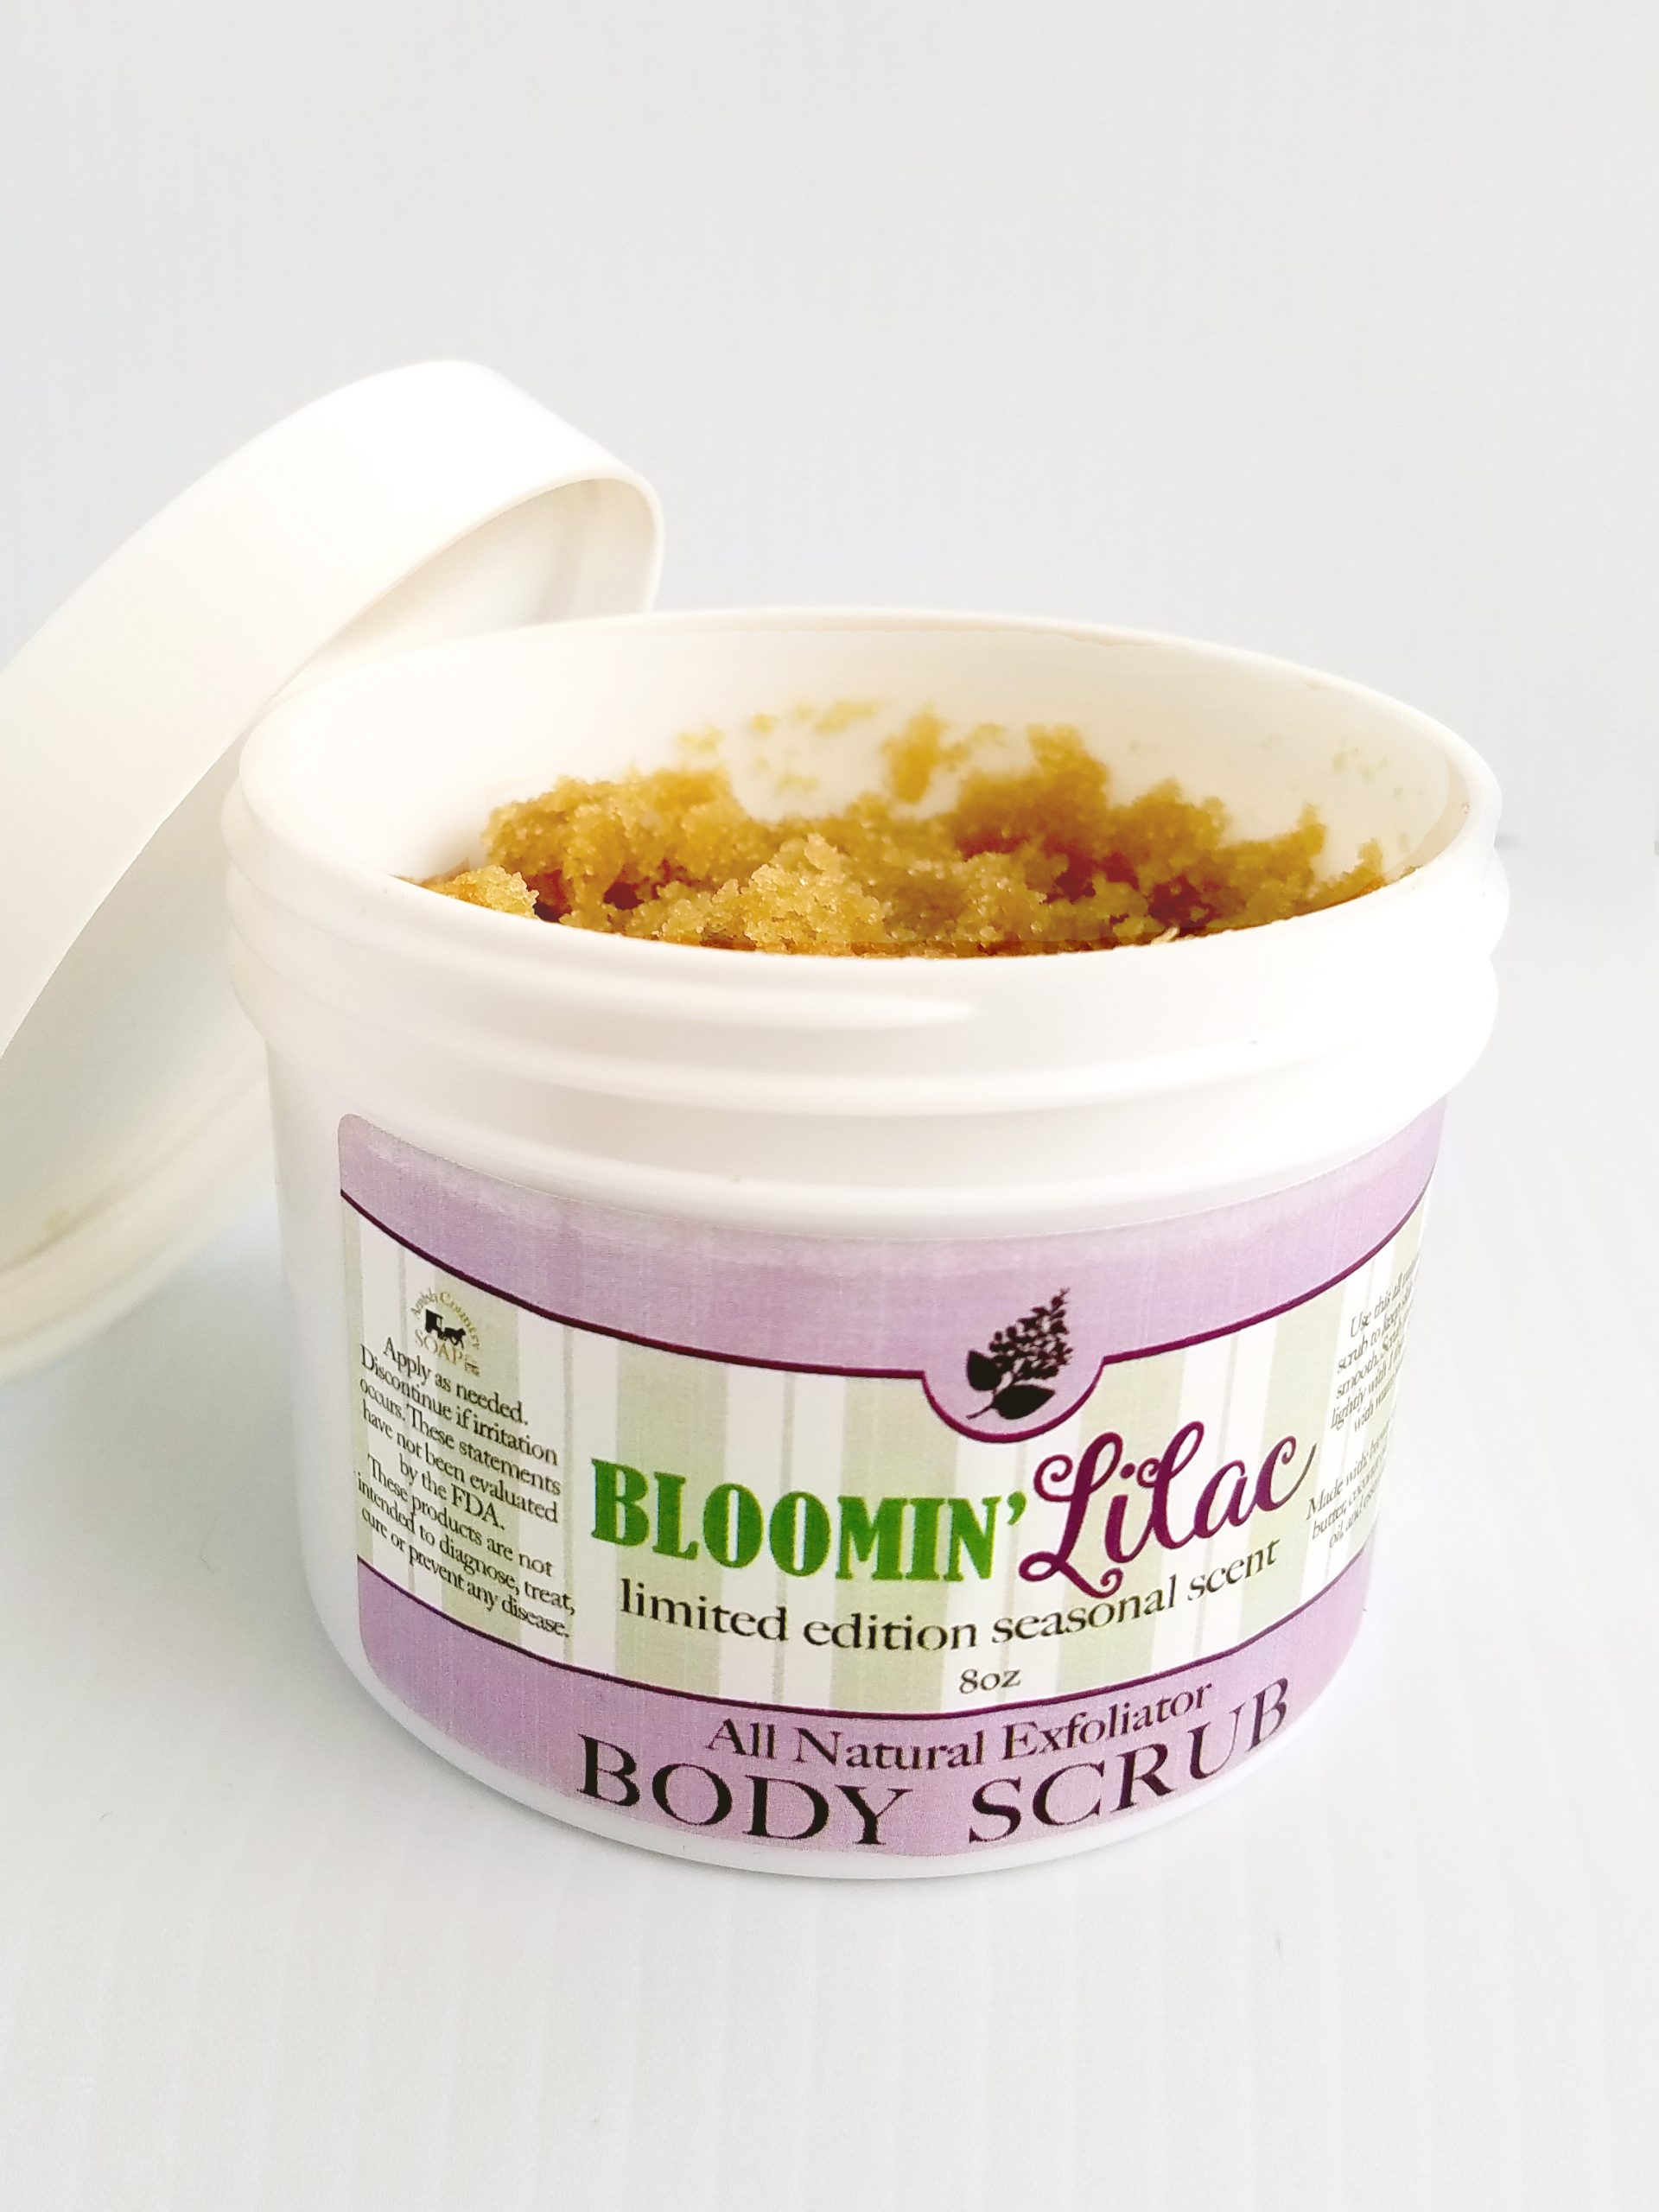 All Natural, Handmade, Bloomin Lilac scrub by Amish Country Soap Co